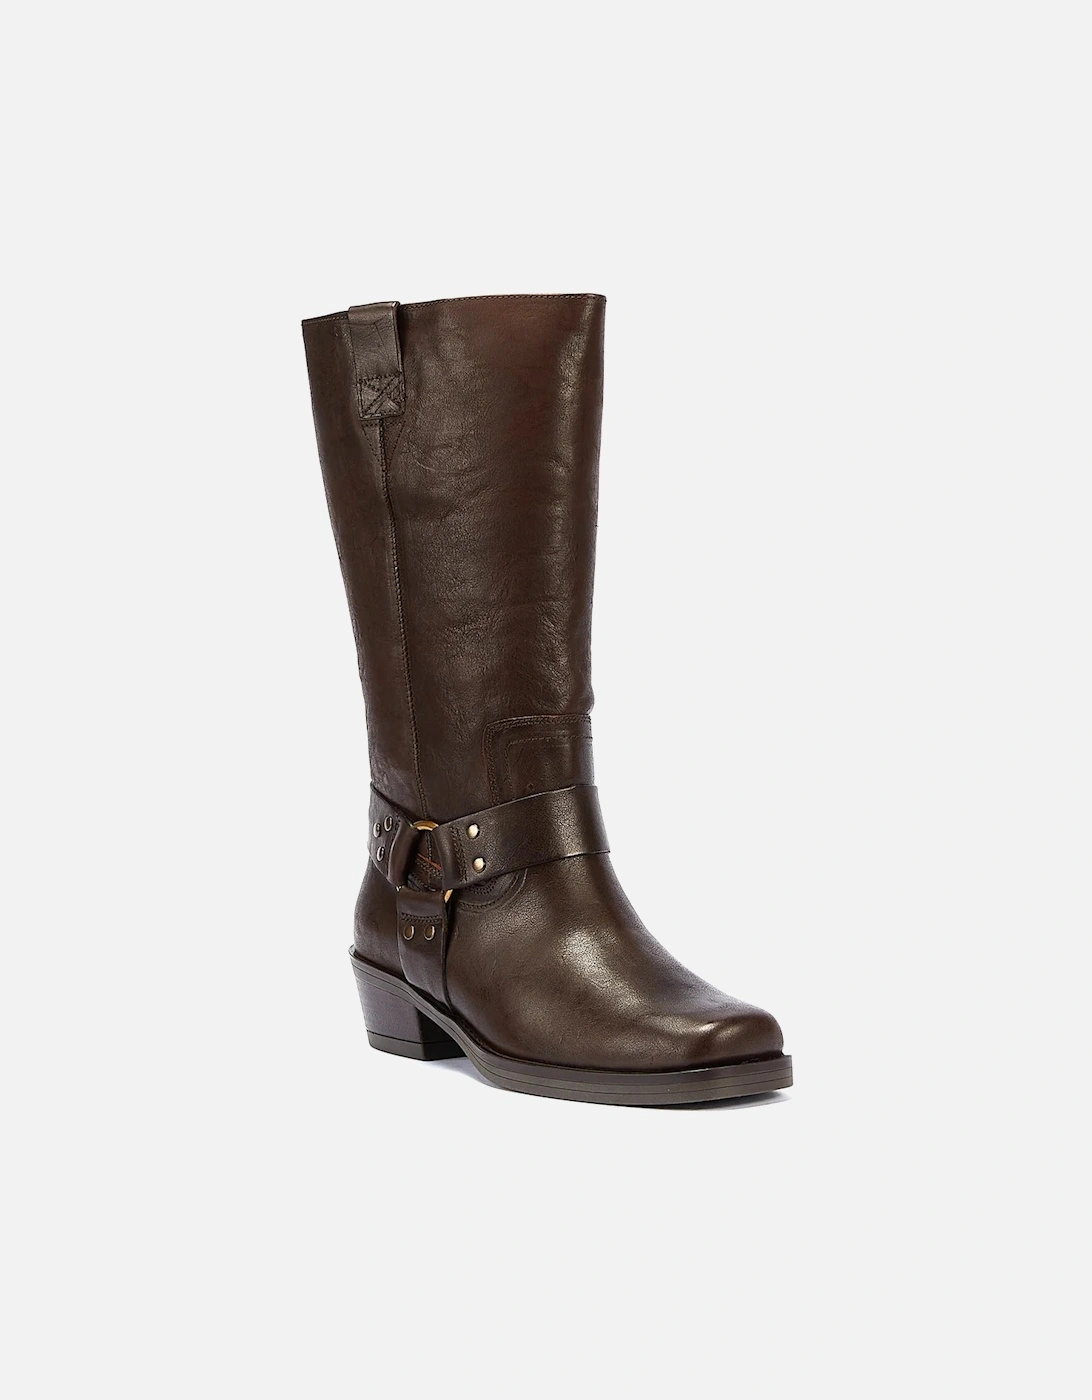 Trig-Ger Harness Waxy Leather Women's Brown Boots